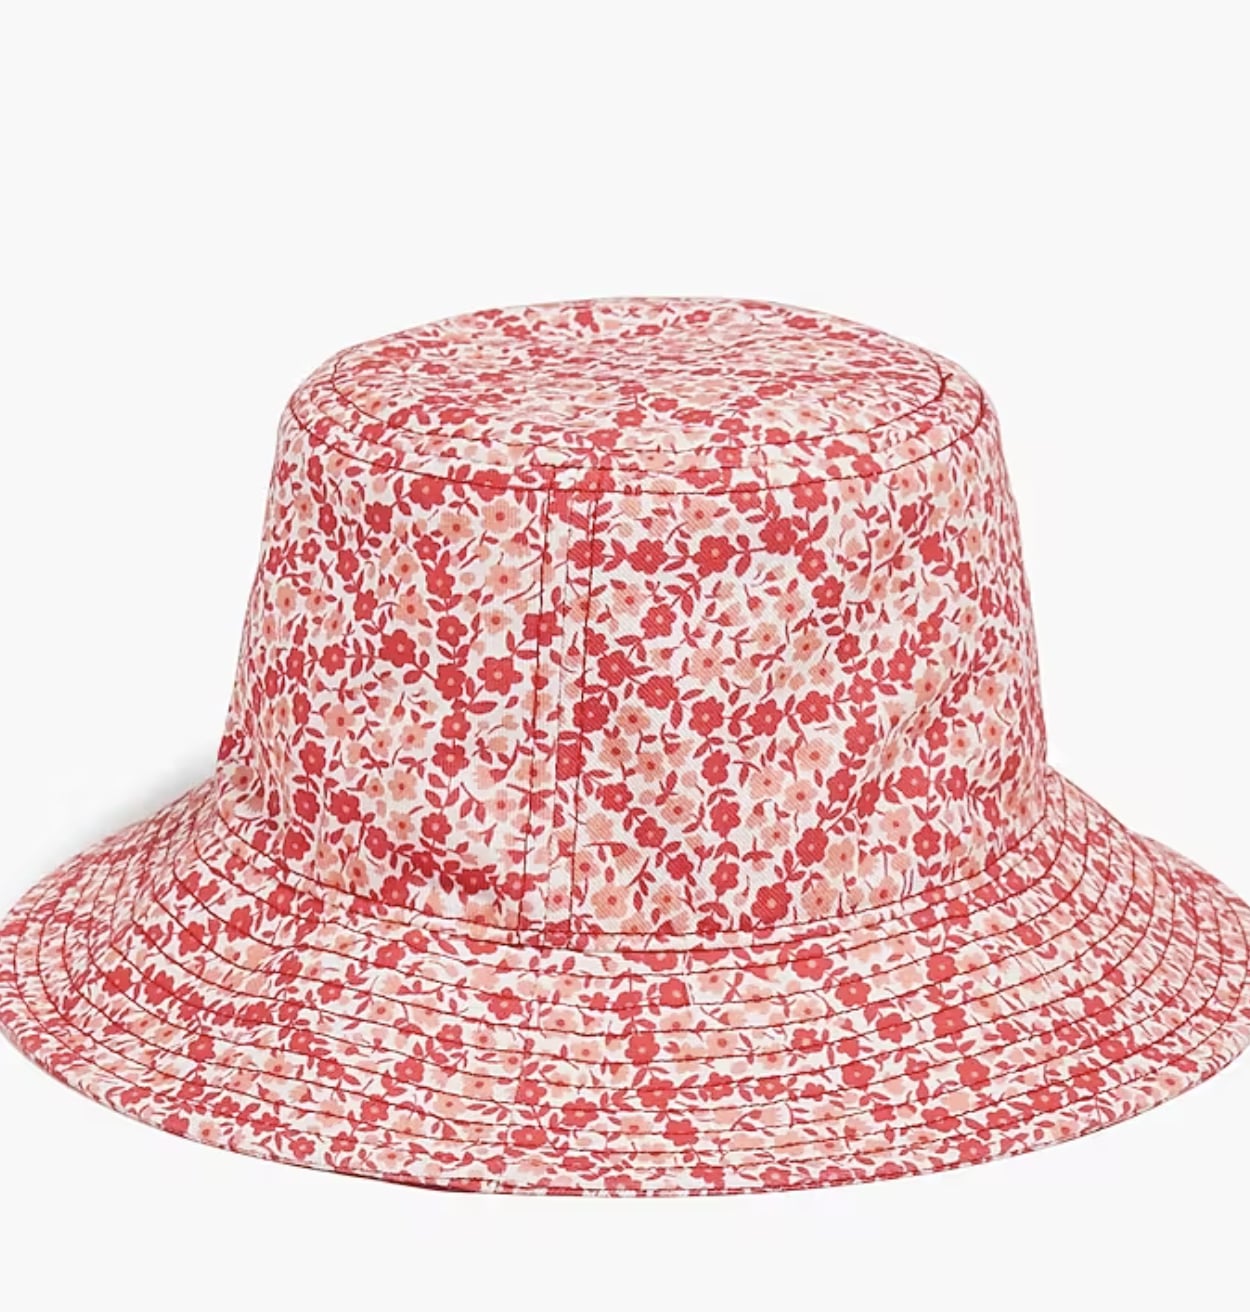 Red and Roses Fashion Women's Bucket Hat-Adult Sun Hat, The Overall Shape  Adds Fashion Elements.